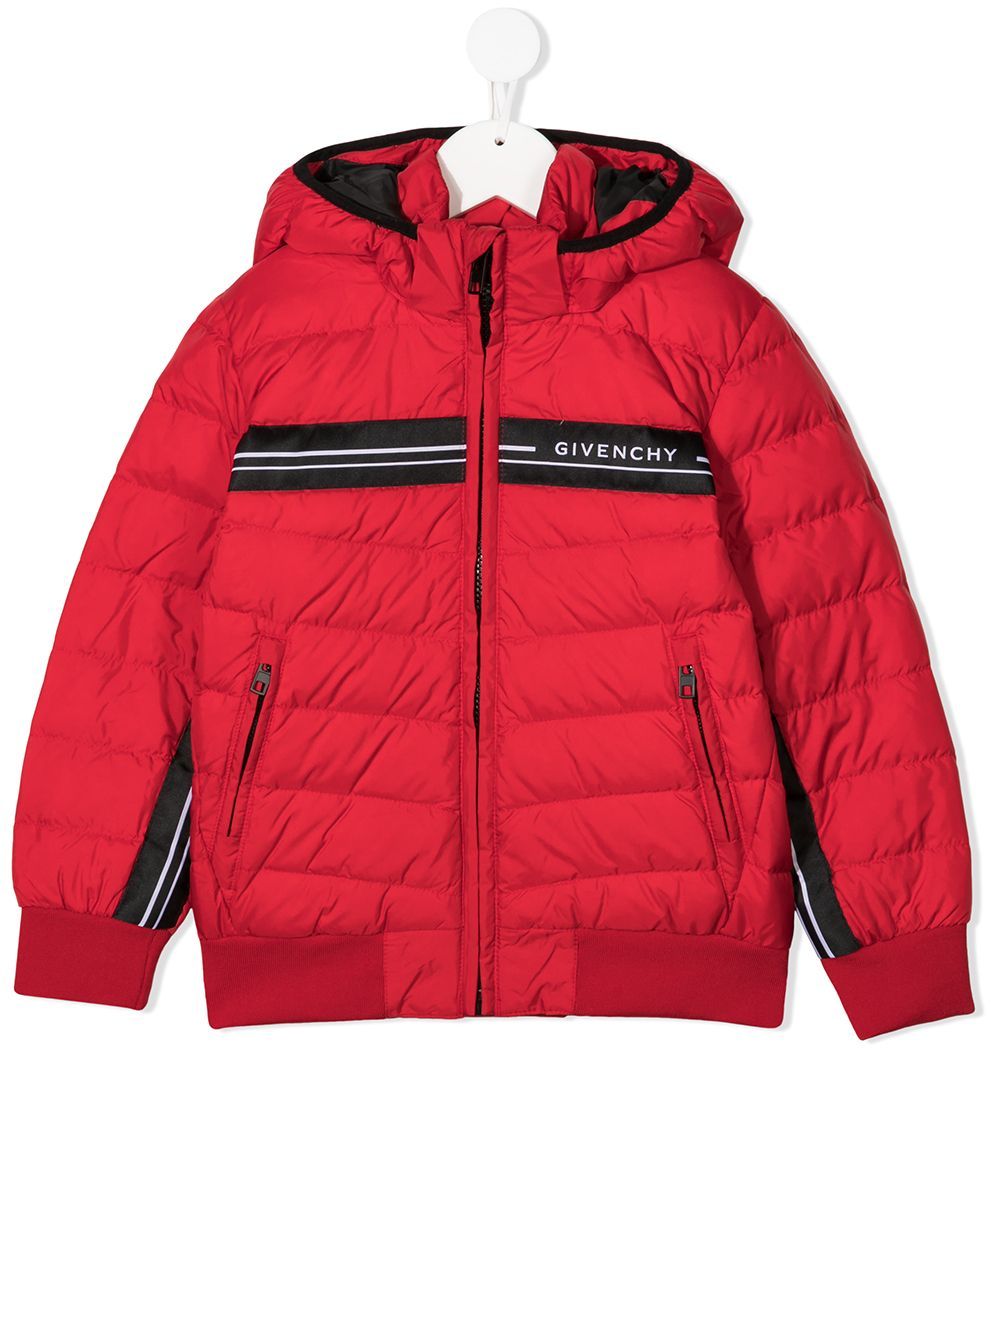 GIVENCHY KIDS Tape Logo Coat Red 